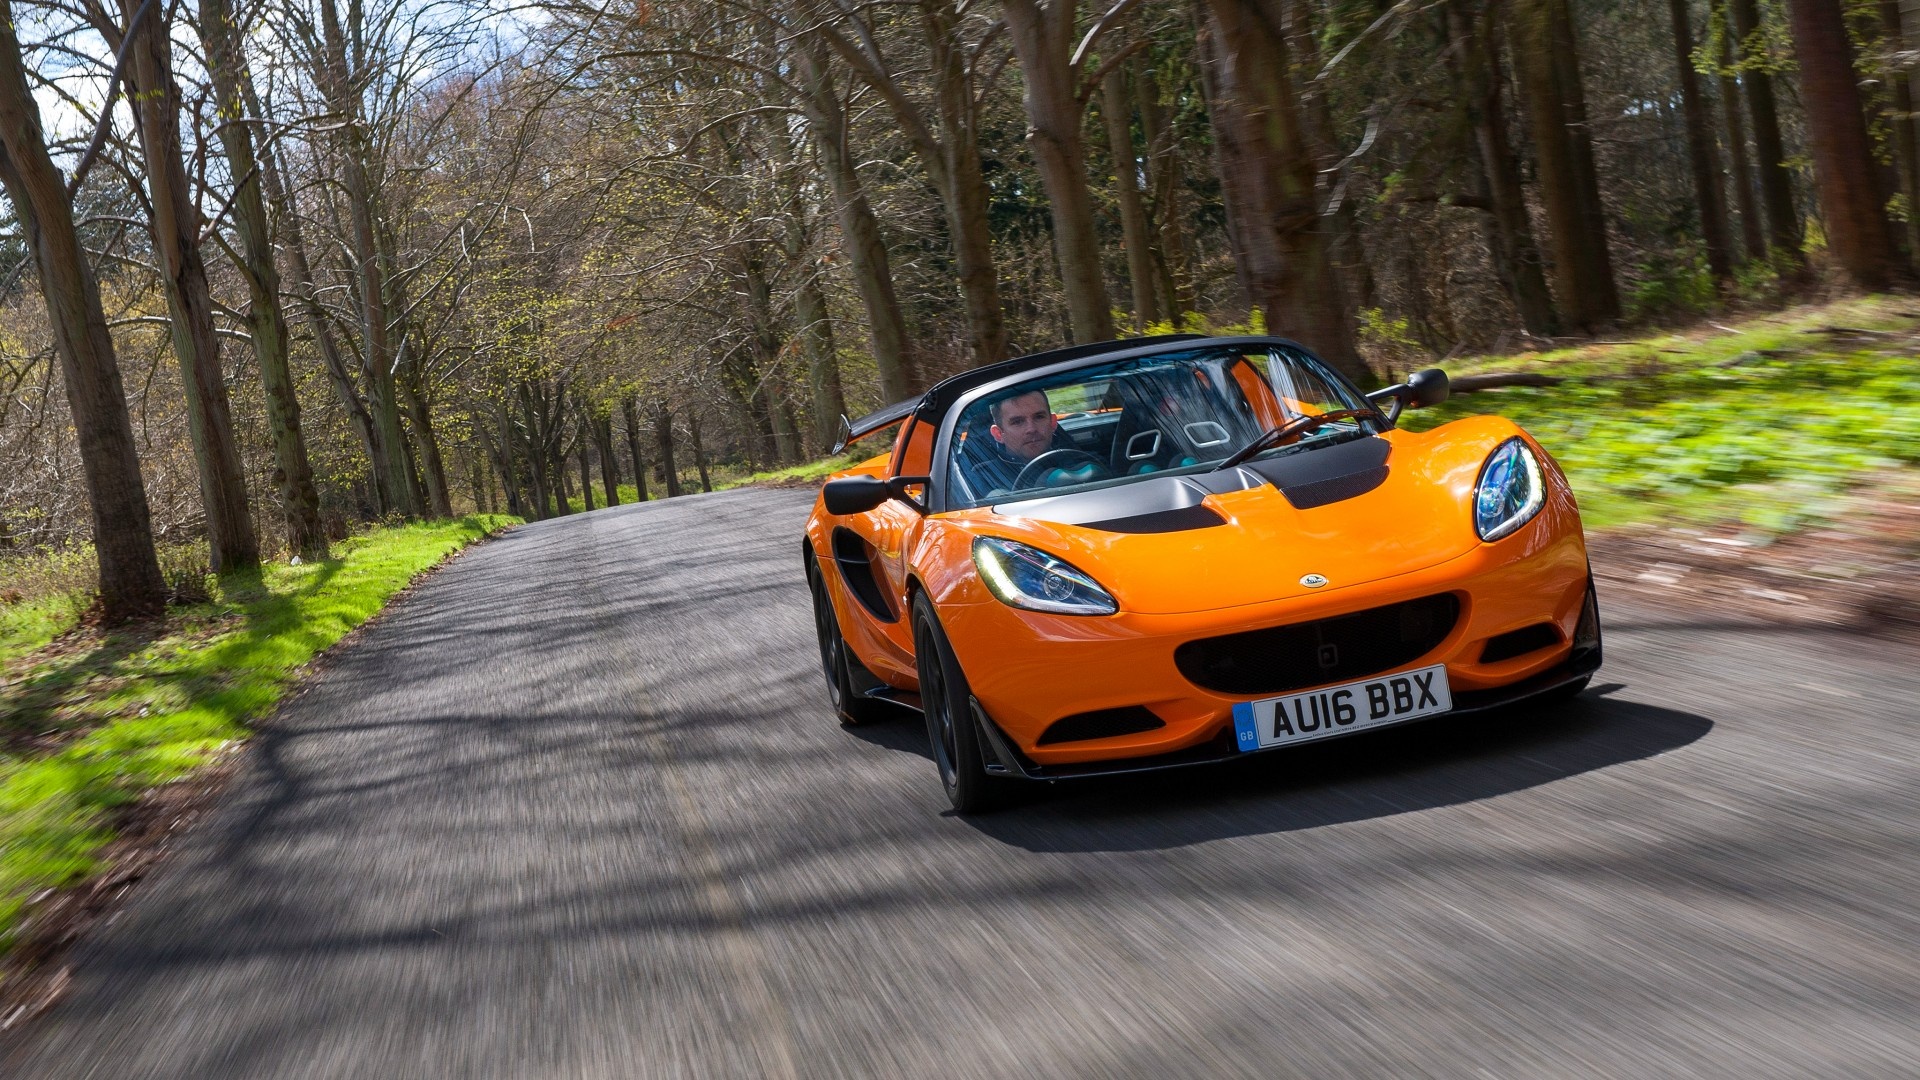 Lotus Elise, Track-ready performance, Sports car excellence, Unmatched speed, 1920x1080 Full HD Desktop